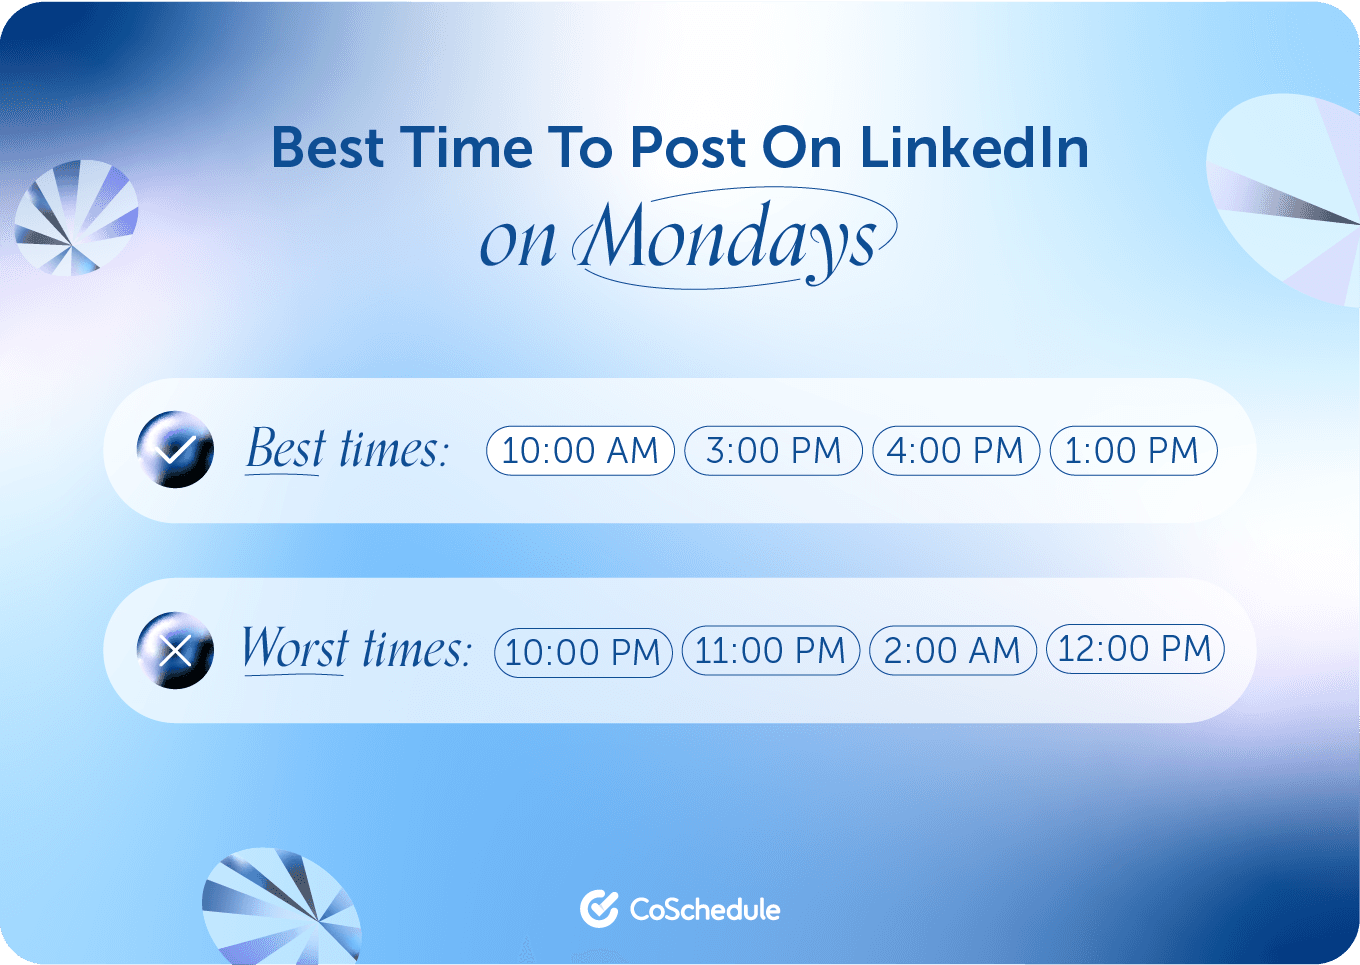 Best Times To Post On LinkedIn In 2023 An Analysis Of 30,000+ Accounts